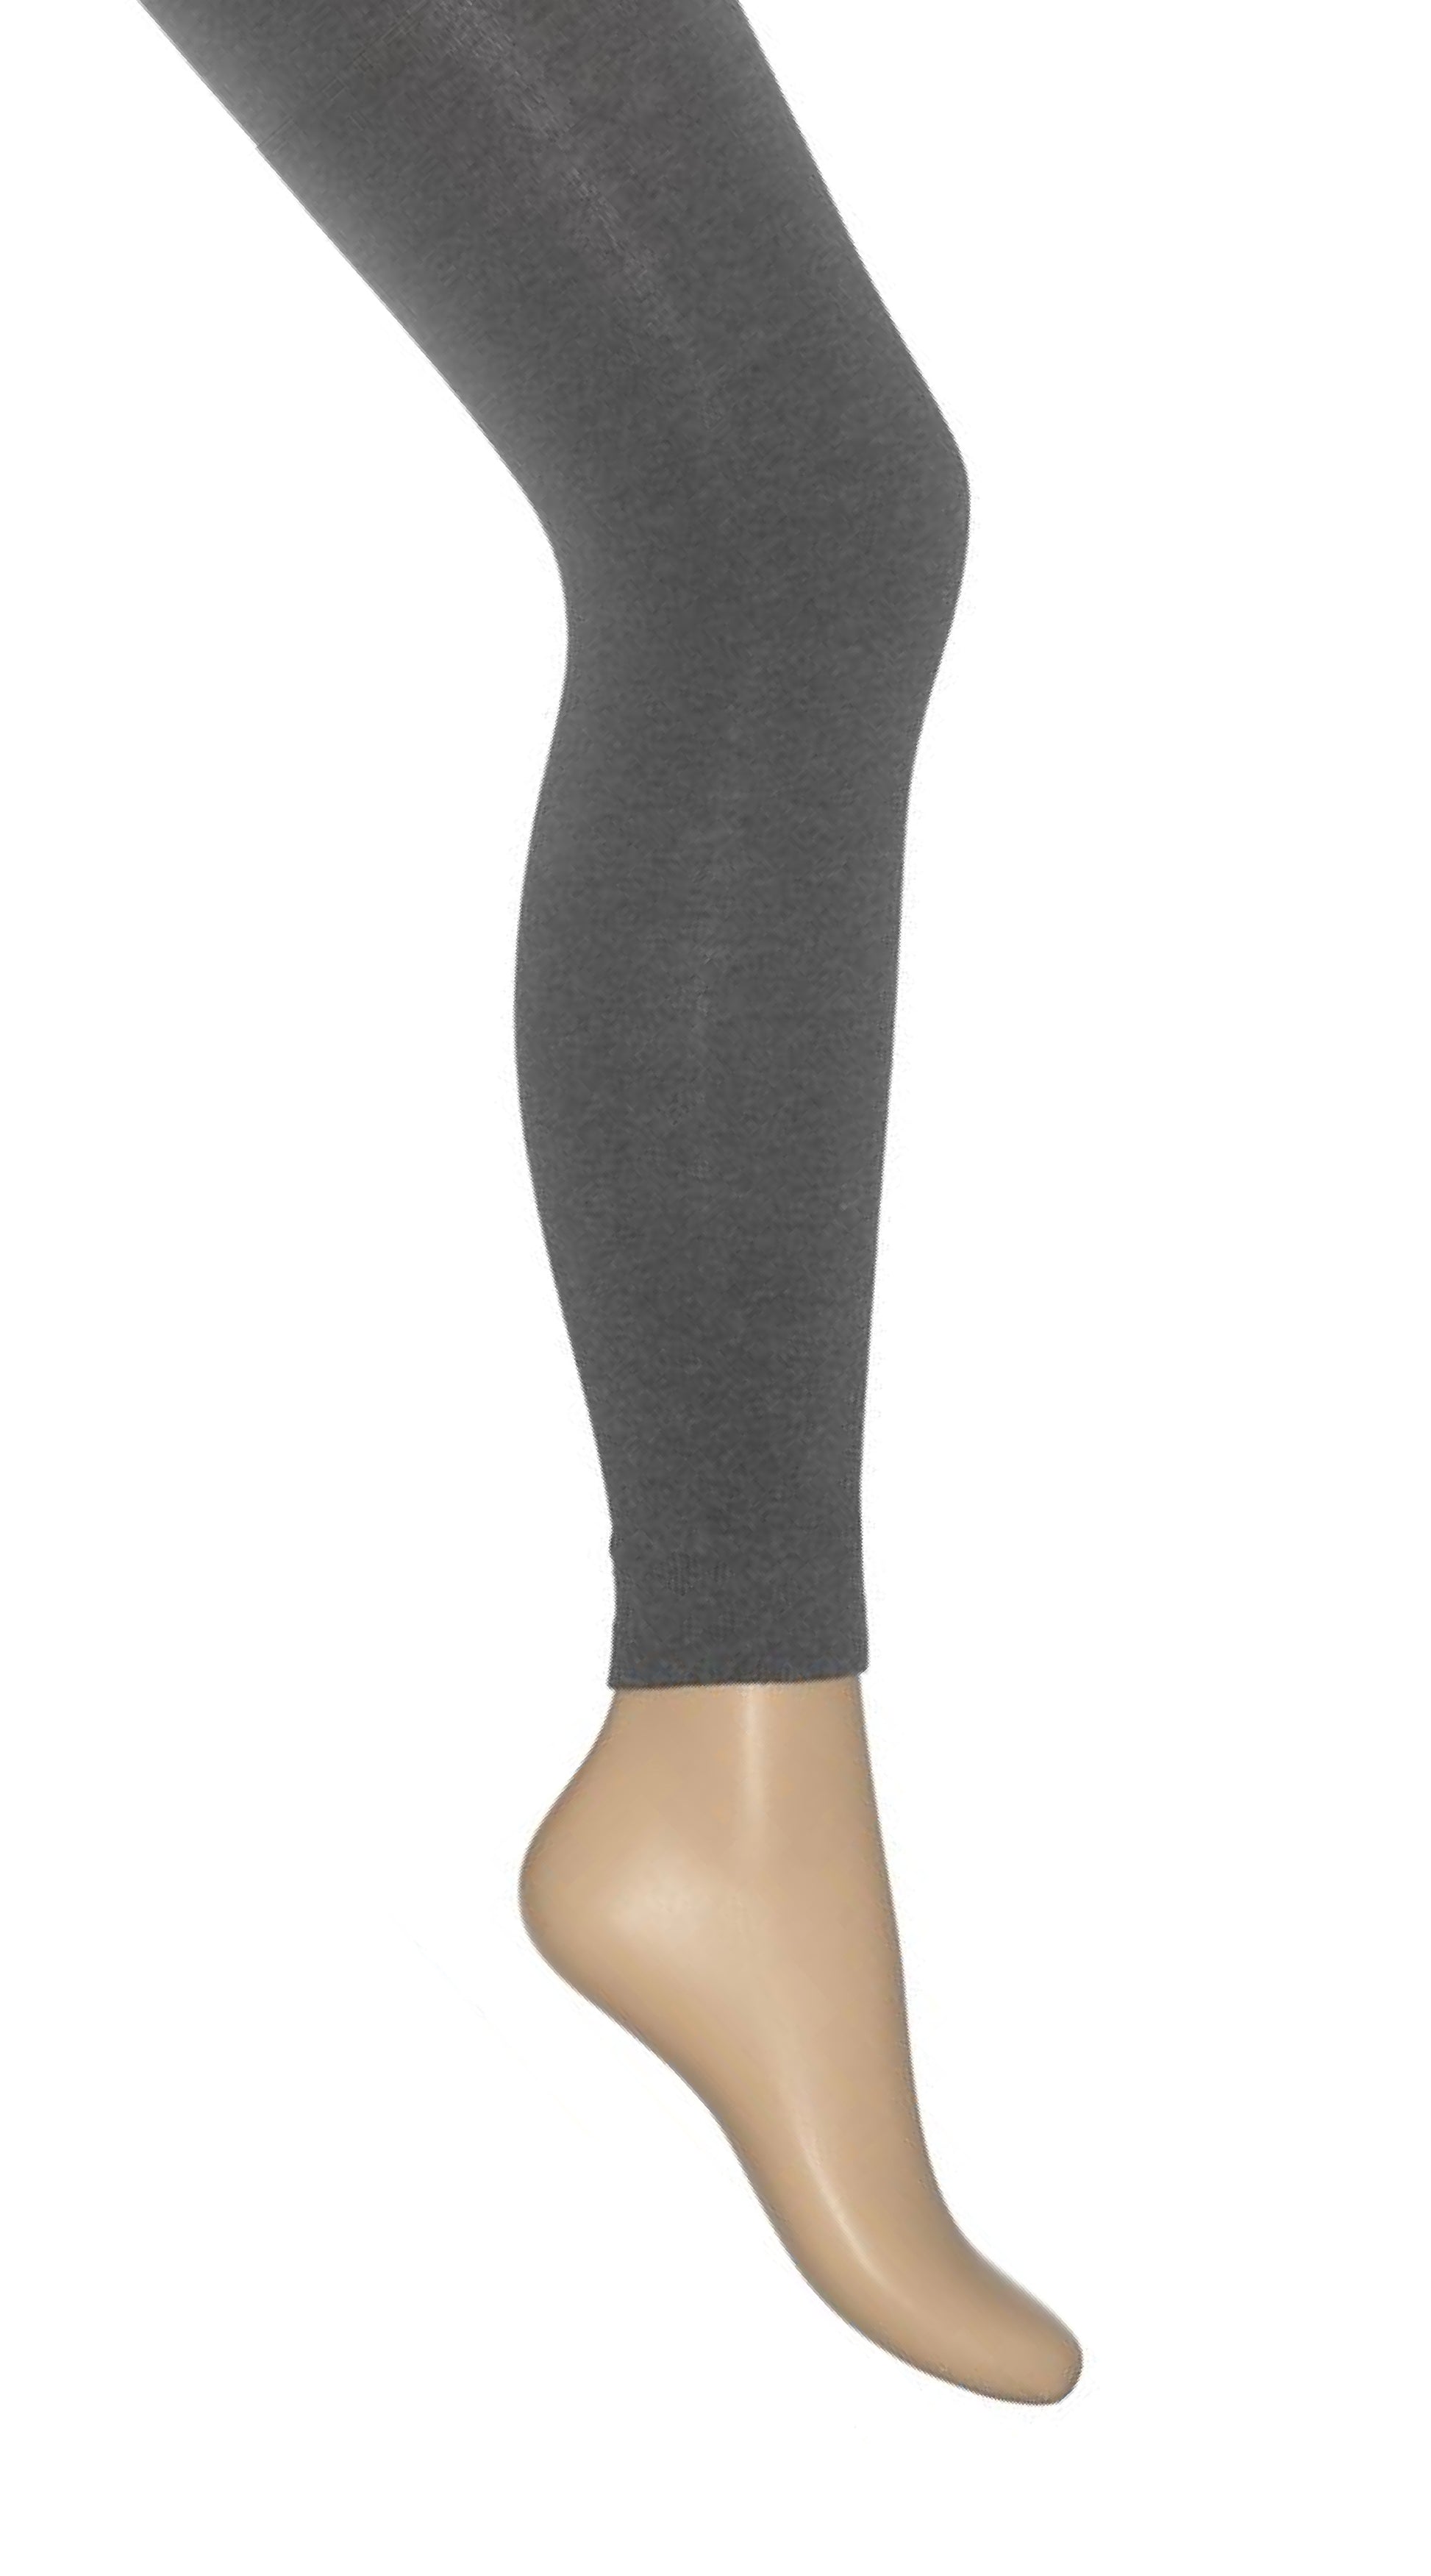 Women's Novelty Footless Tights